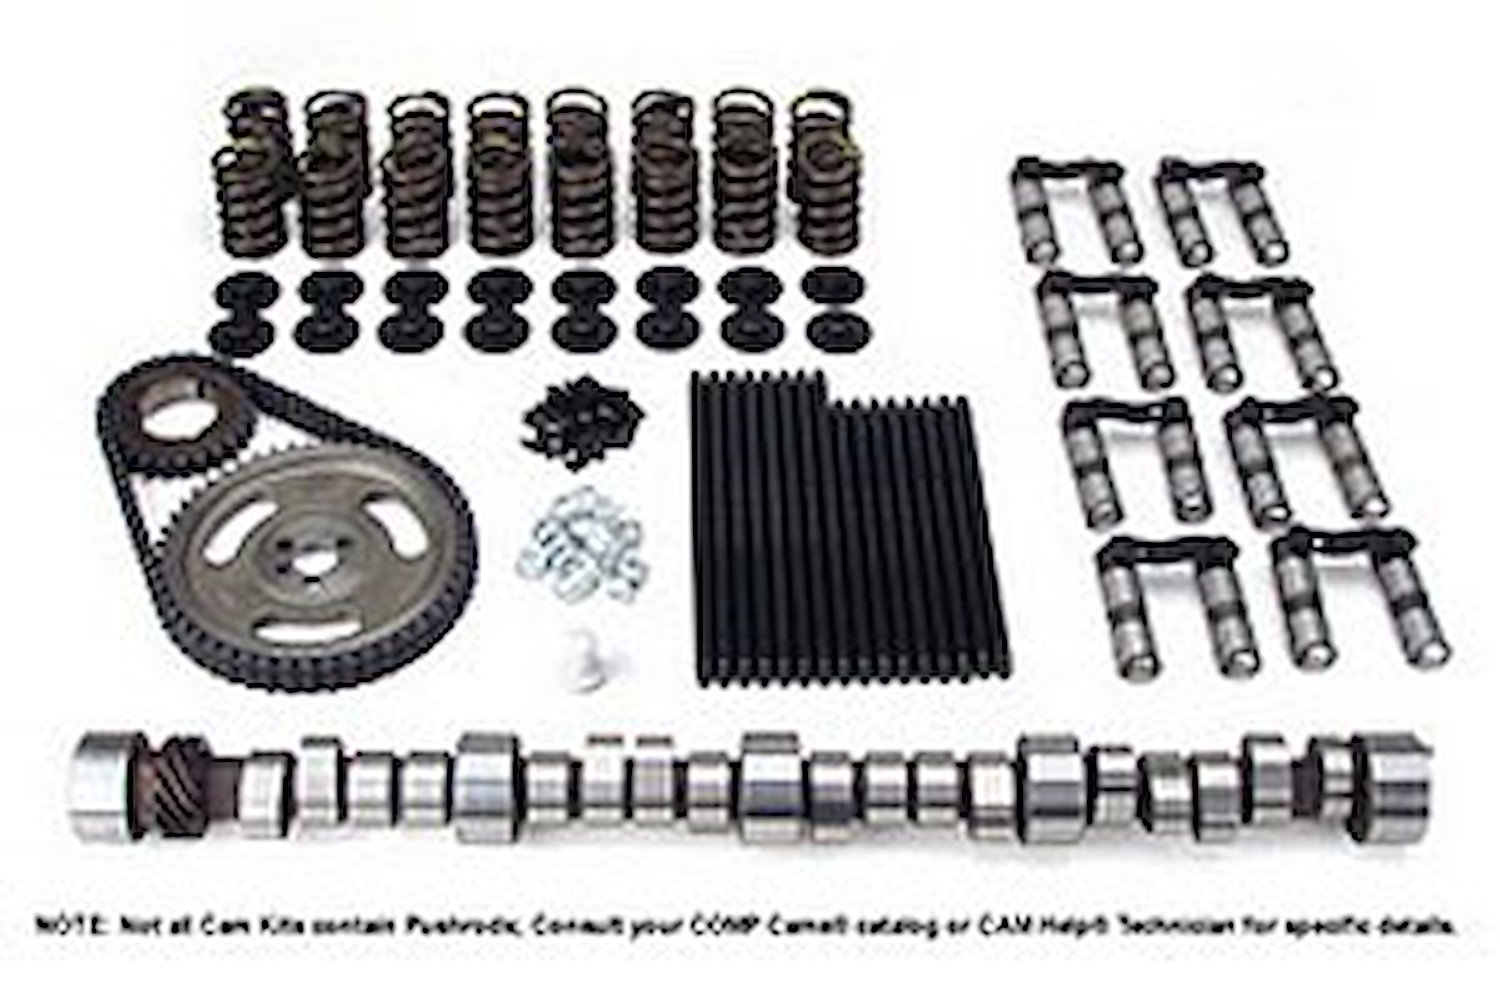 Magnum Hydraulic Roller Camshaft Complete Kit Chevy Big Block 396-454 Retro Fit Lift: .612"/.612"